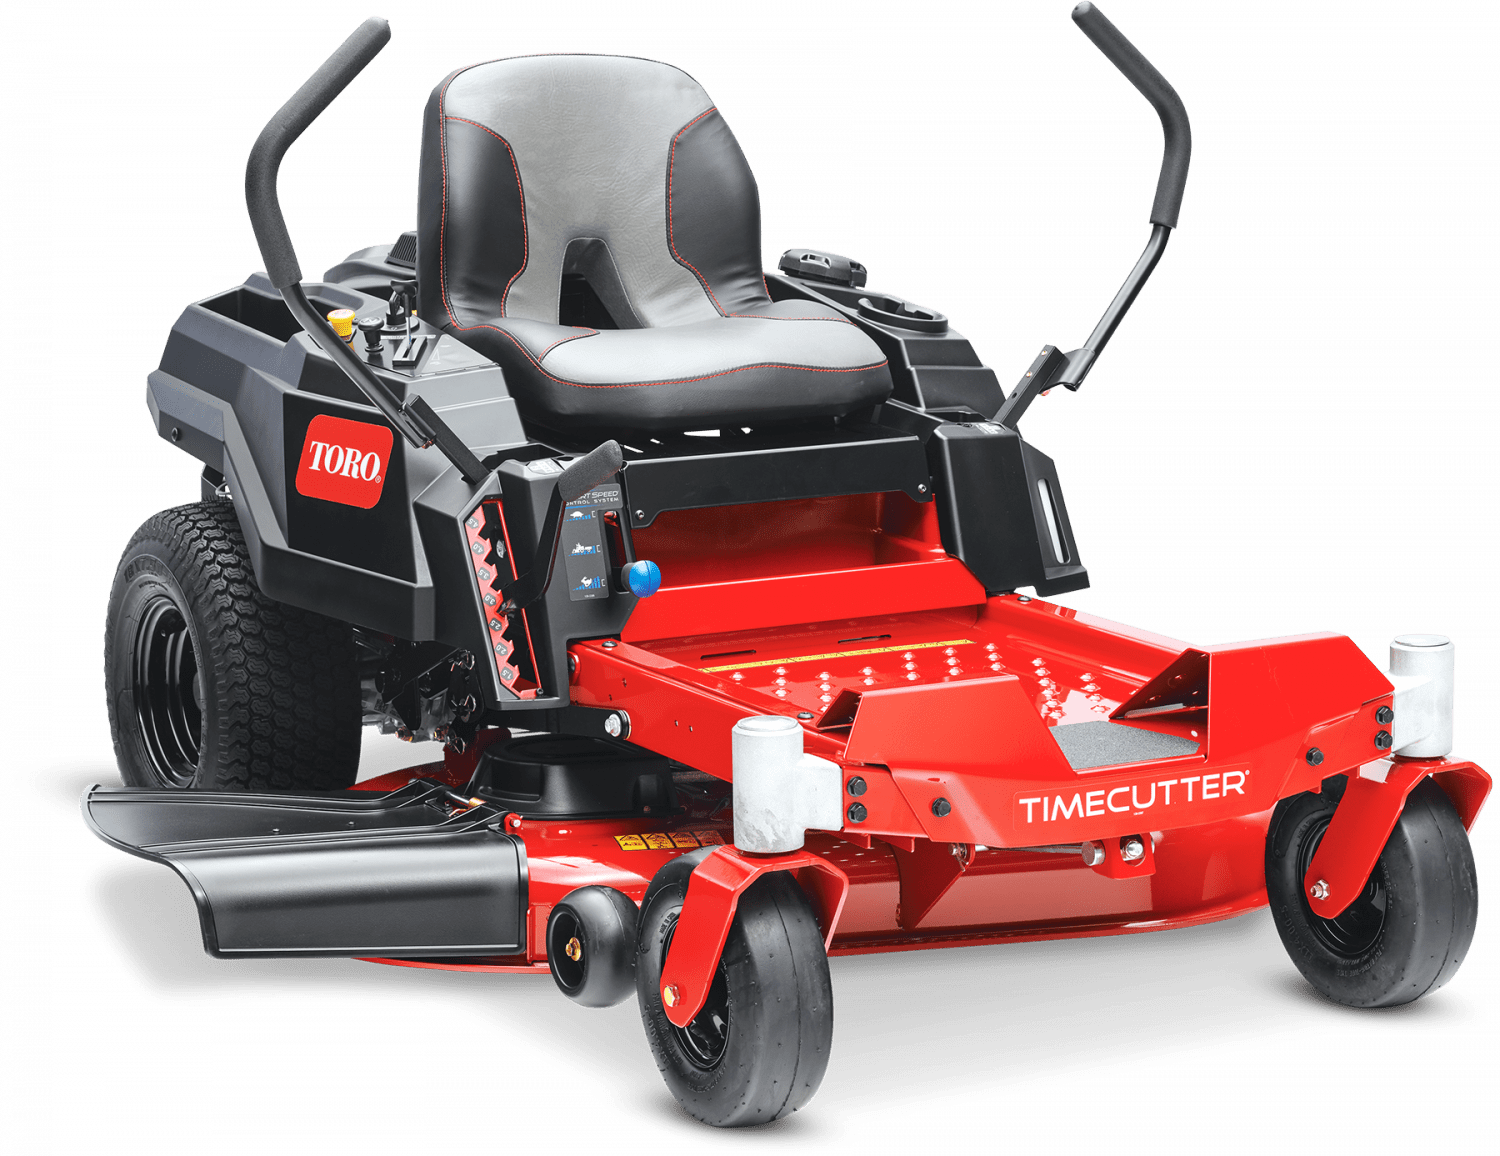 https://www.torocatalogue.com.au/wp-content/uploads/2021/12/co19_4331s_tcz_42in_stamped_75742_34r-1500x1156.png